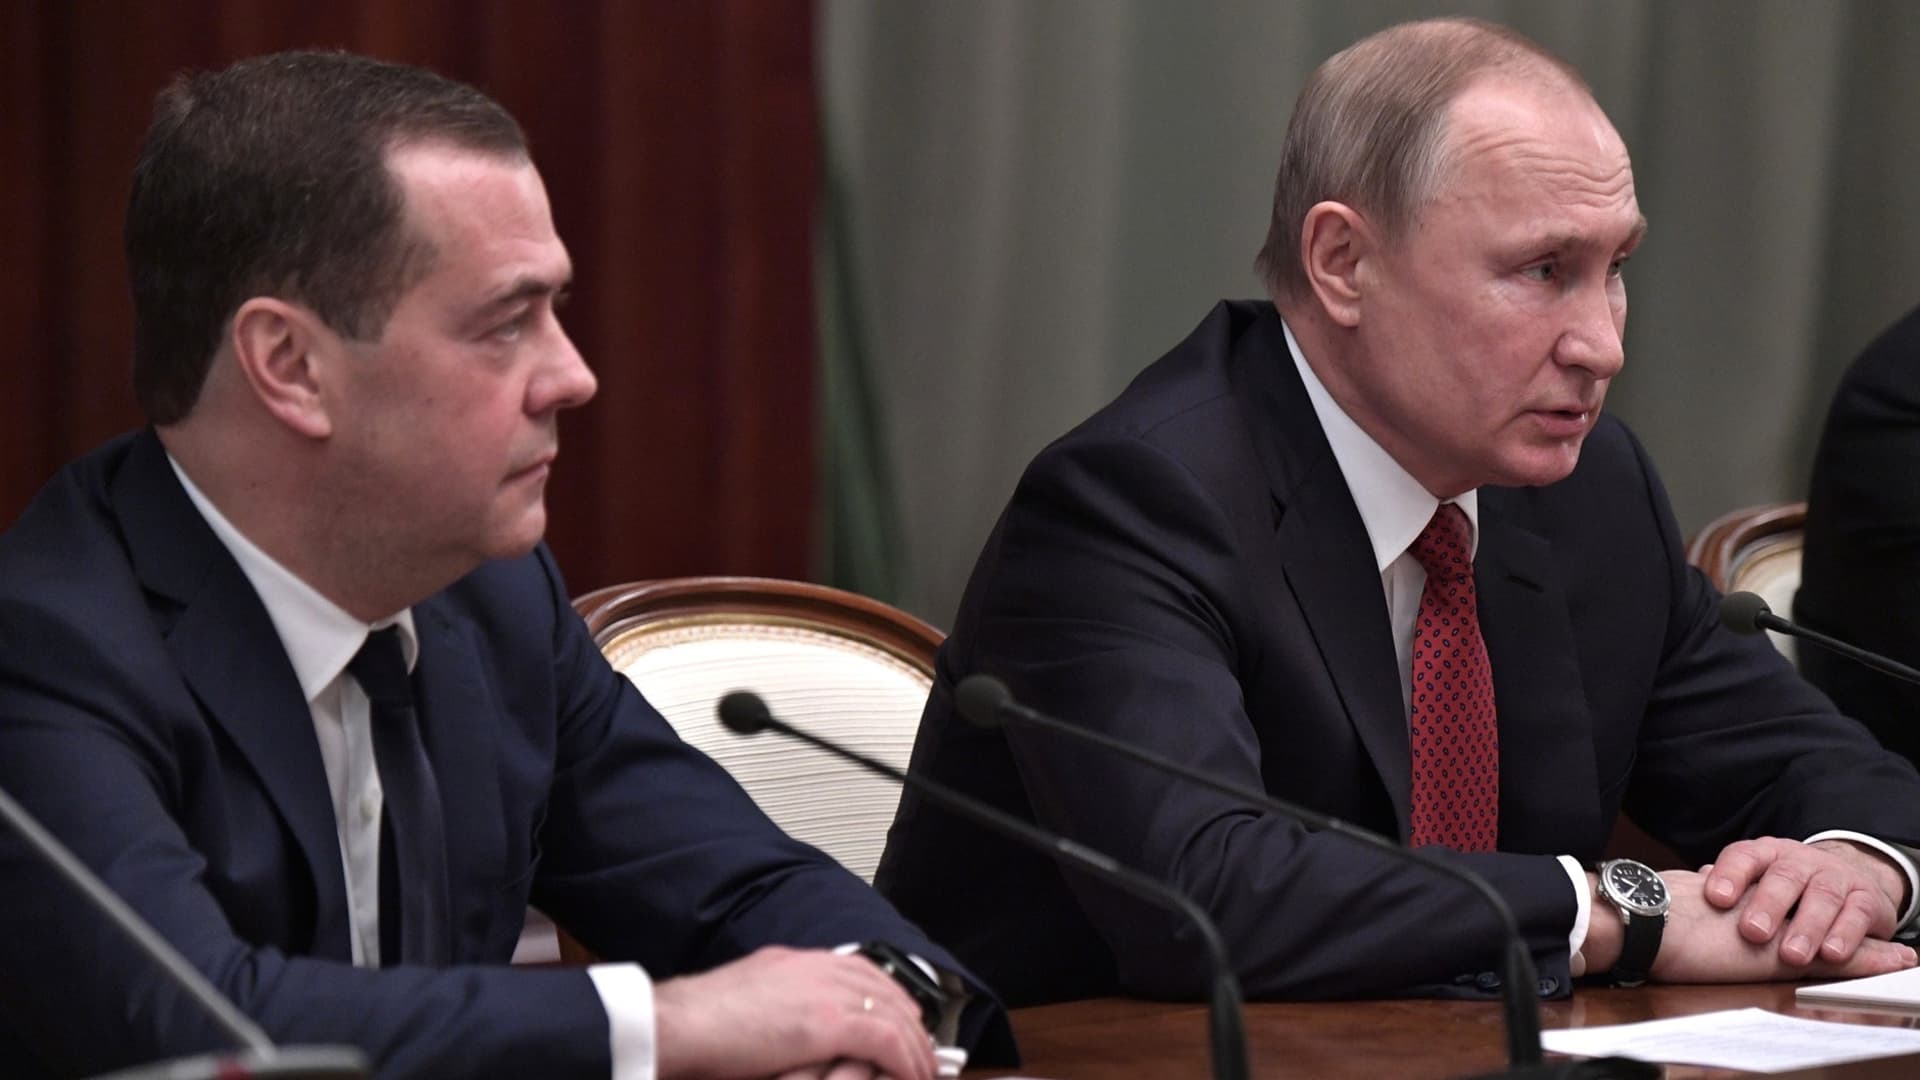 Russian President Vladimir Putin (R) and Russian Prime Minister Dmitriy Medvedev are seen at a meeting with the government, following Putin's address to the Federal Assembly, in Moscow, Russia on January 15, 2020.